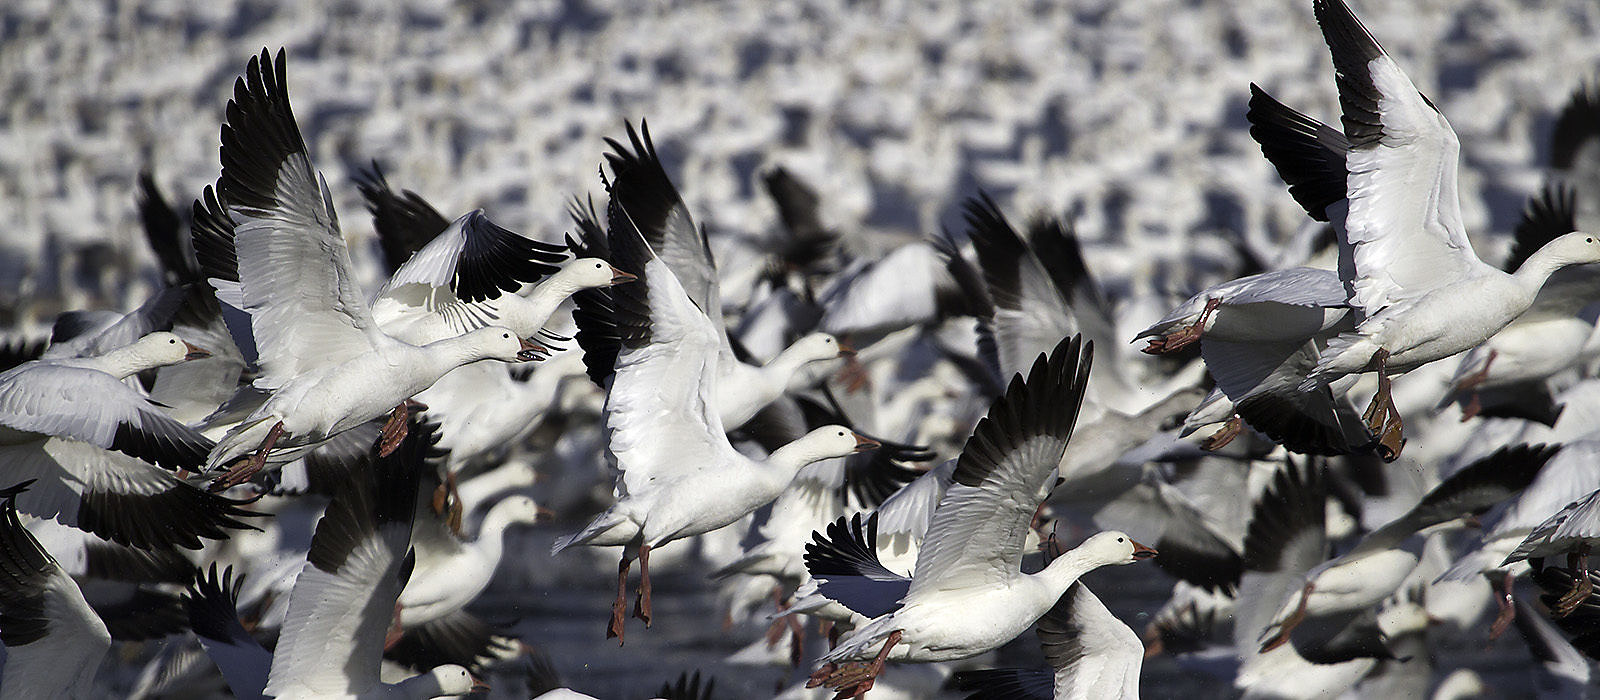 Snow Geese lifting off by Bryan Pfeiffer